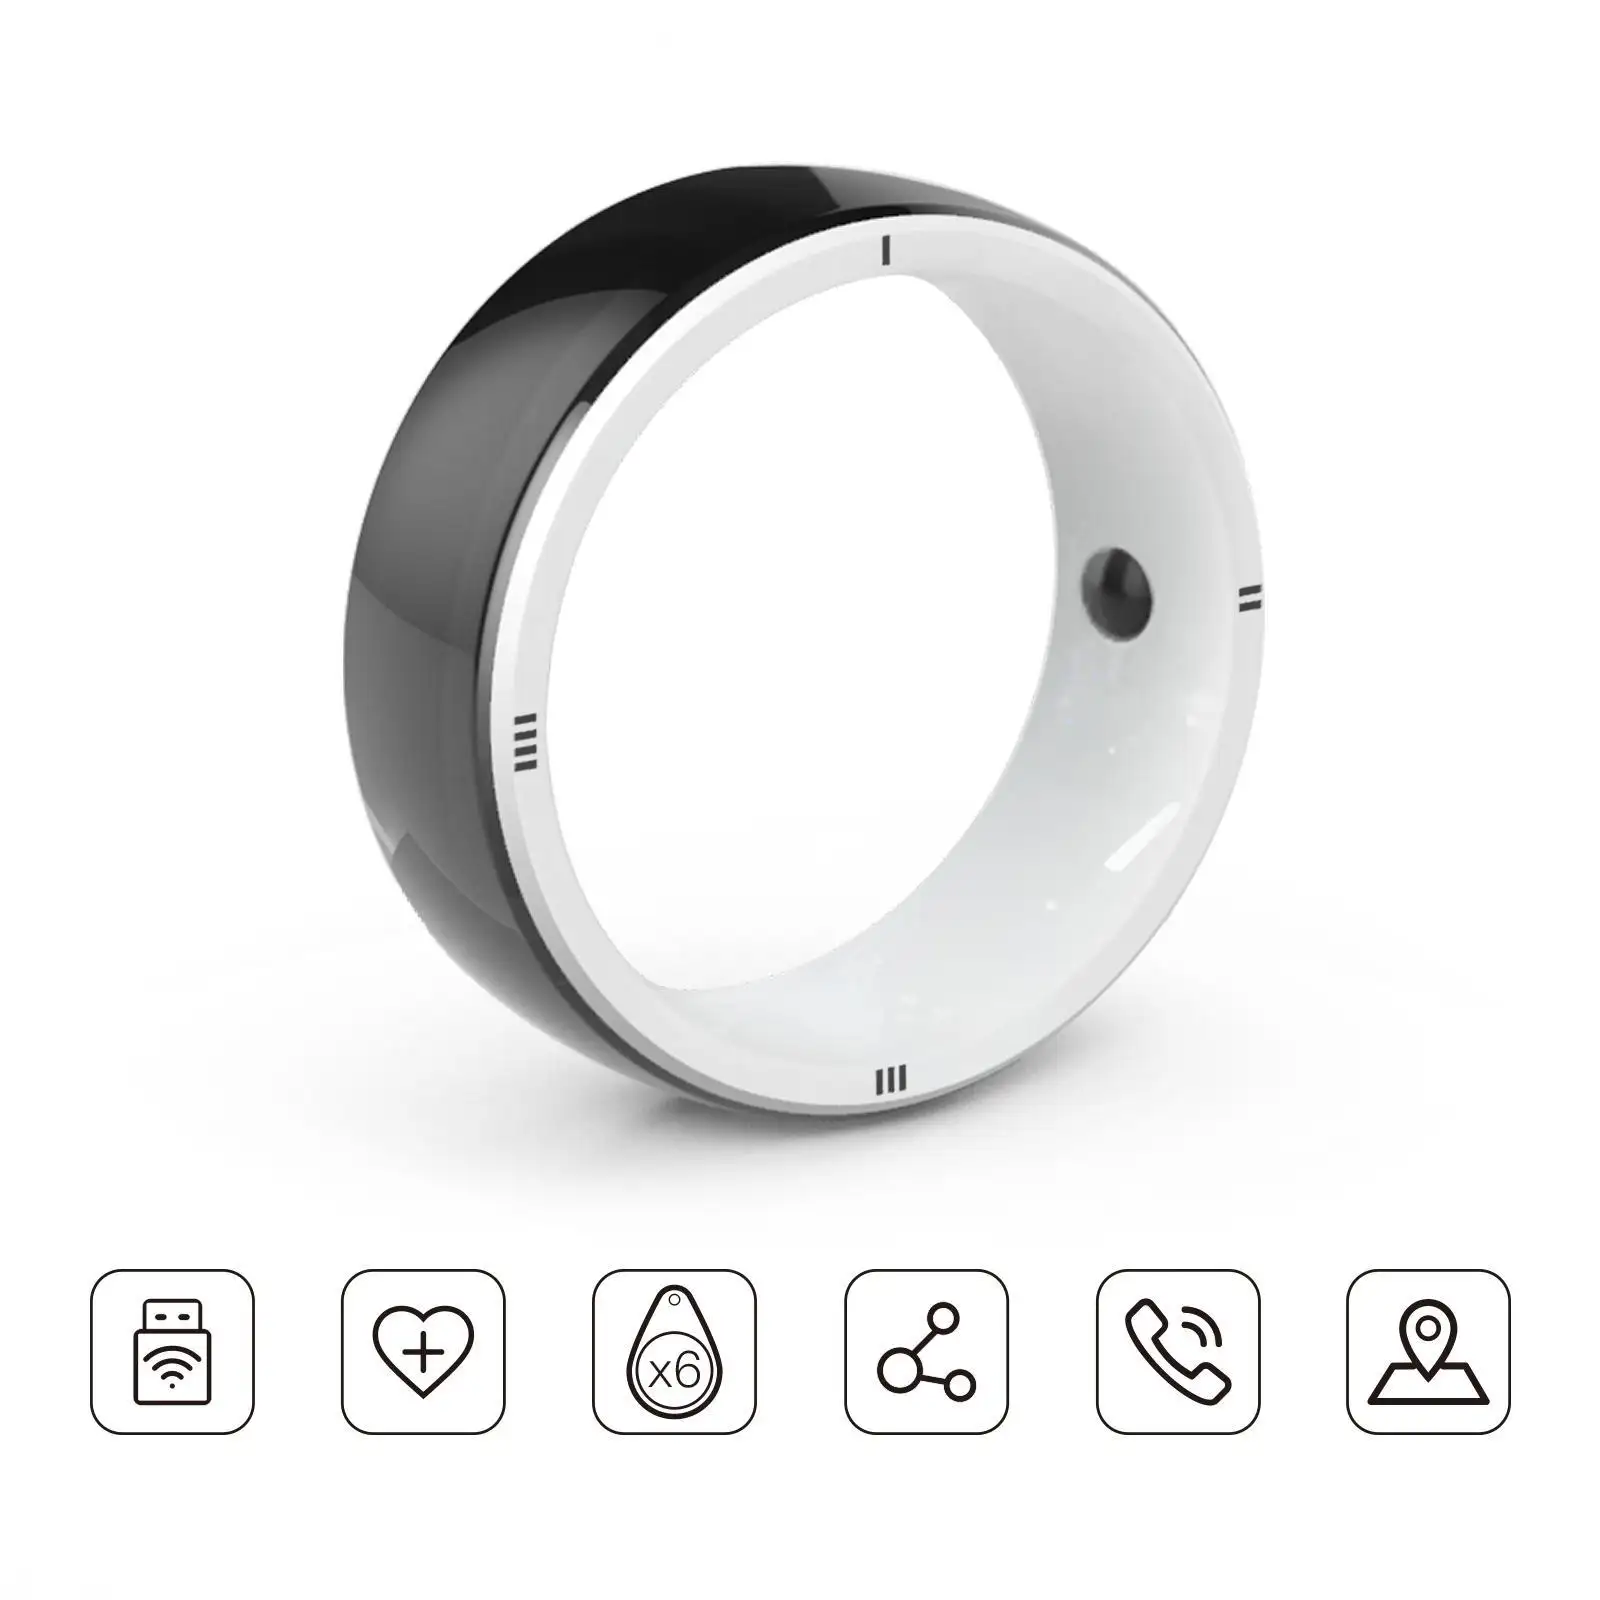 JAKCOM R5 Smart Ring New Smart Ring better than 512mb floppy disk wireless home theatre best picture frame external hard drive